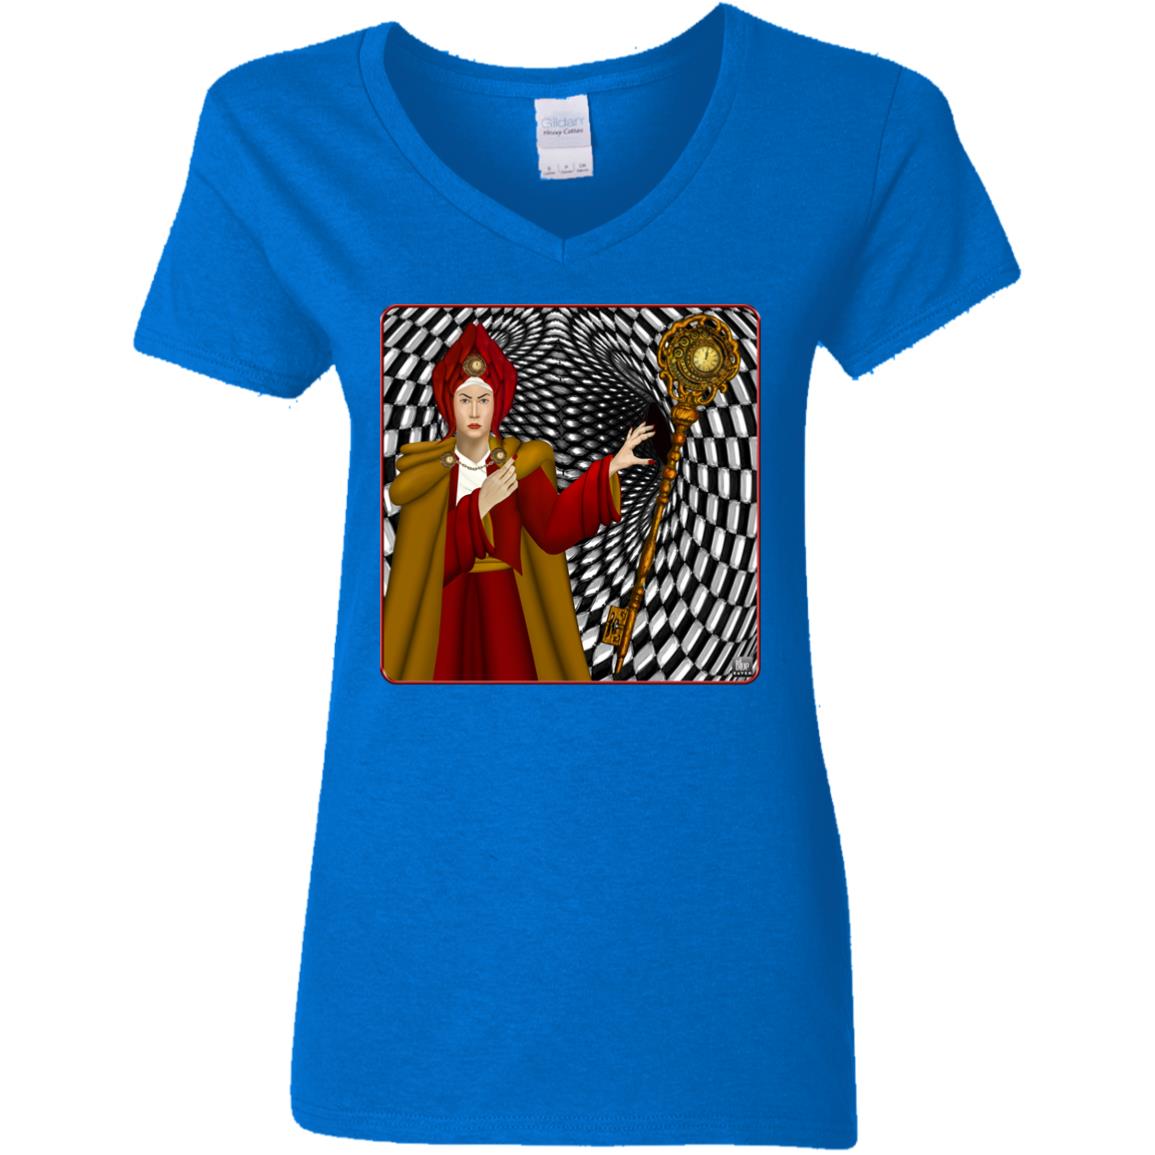 Portrait Of The Red Queen - Women's V-Neck T Shirt